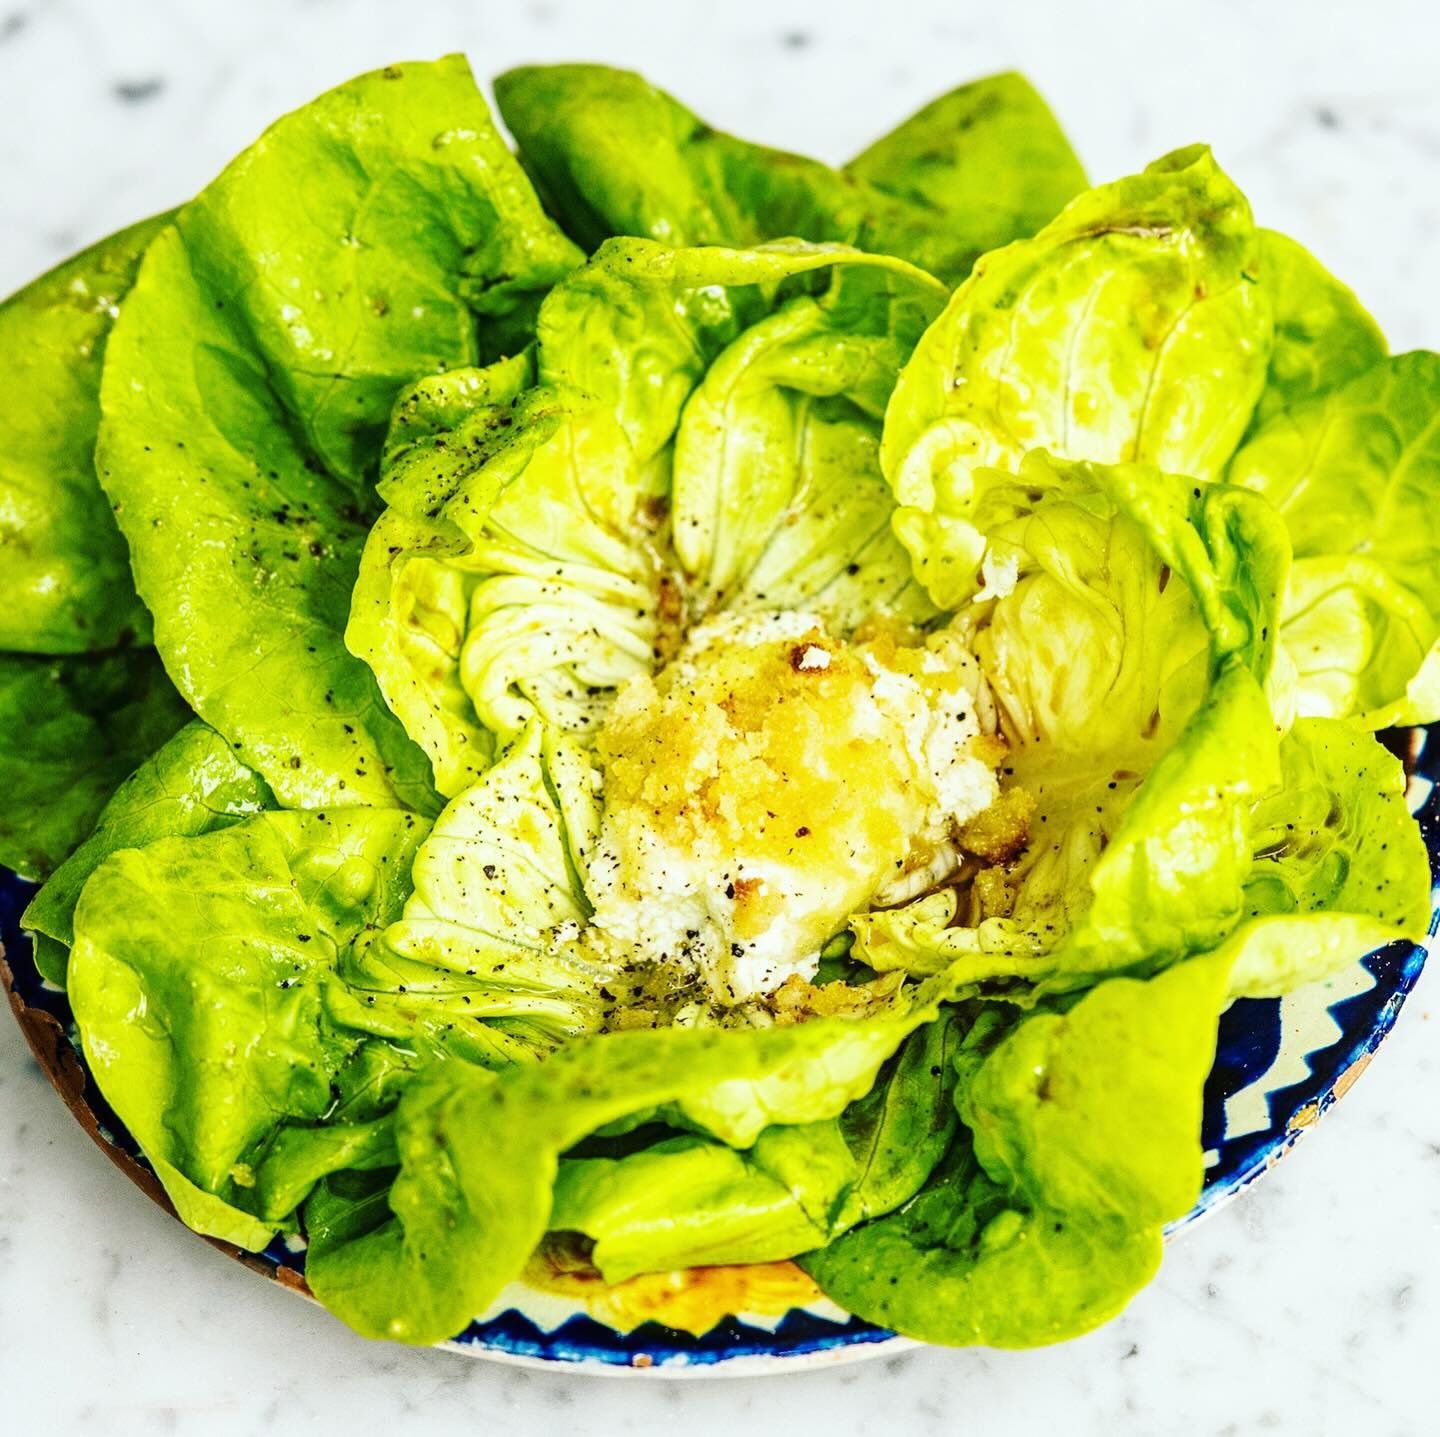 Easy Bibb Salad&mdash;For each guest, open a small head of Bibb lettuce into a flower shape, plate, drizzle with a dressing of choice, and top with Baked Goat Cheese and cracked pepper. Find the link to the recipe in my bio.
+
I am Sally Uhlmann. My 